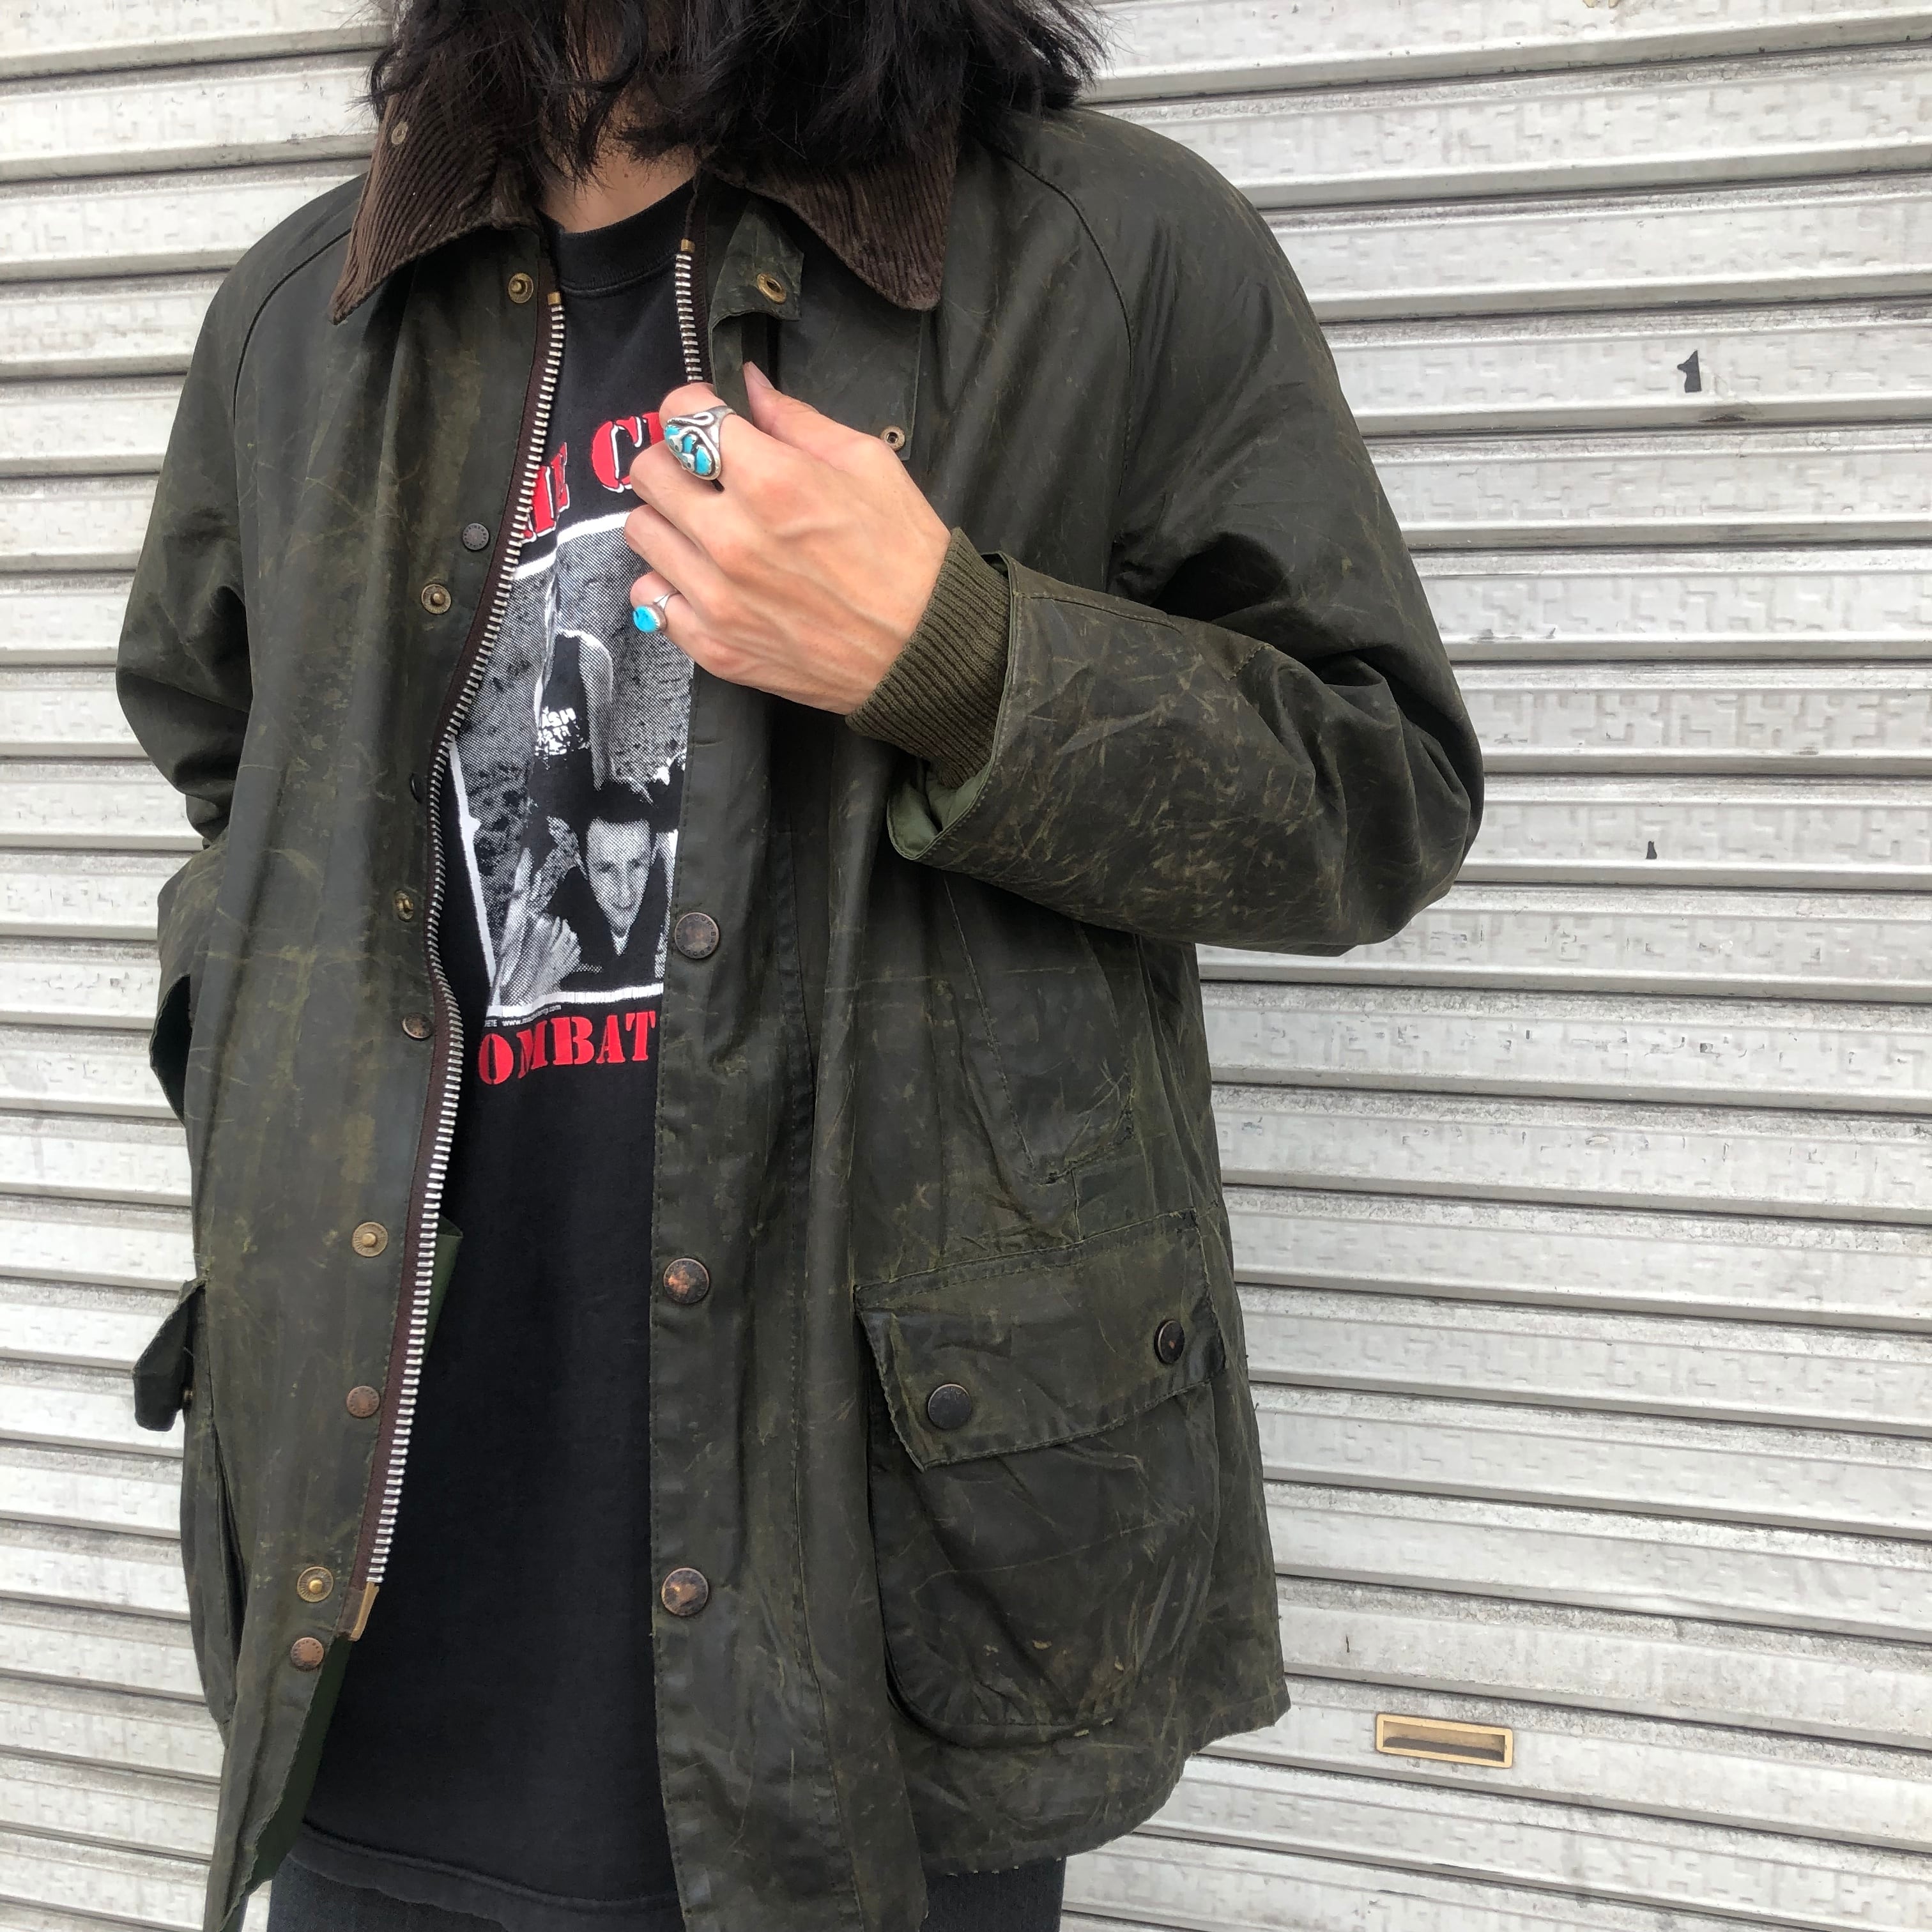 90s Barbour bedale jacket